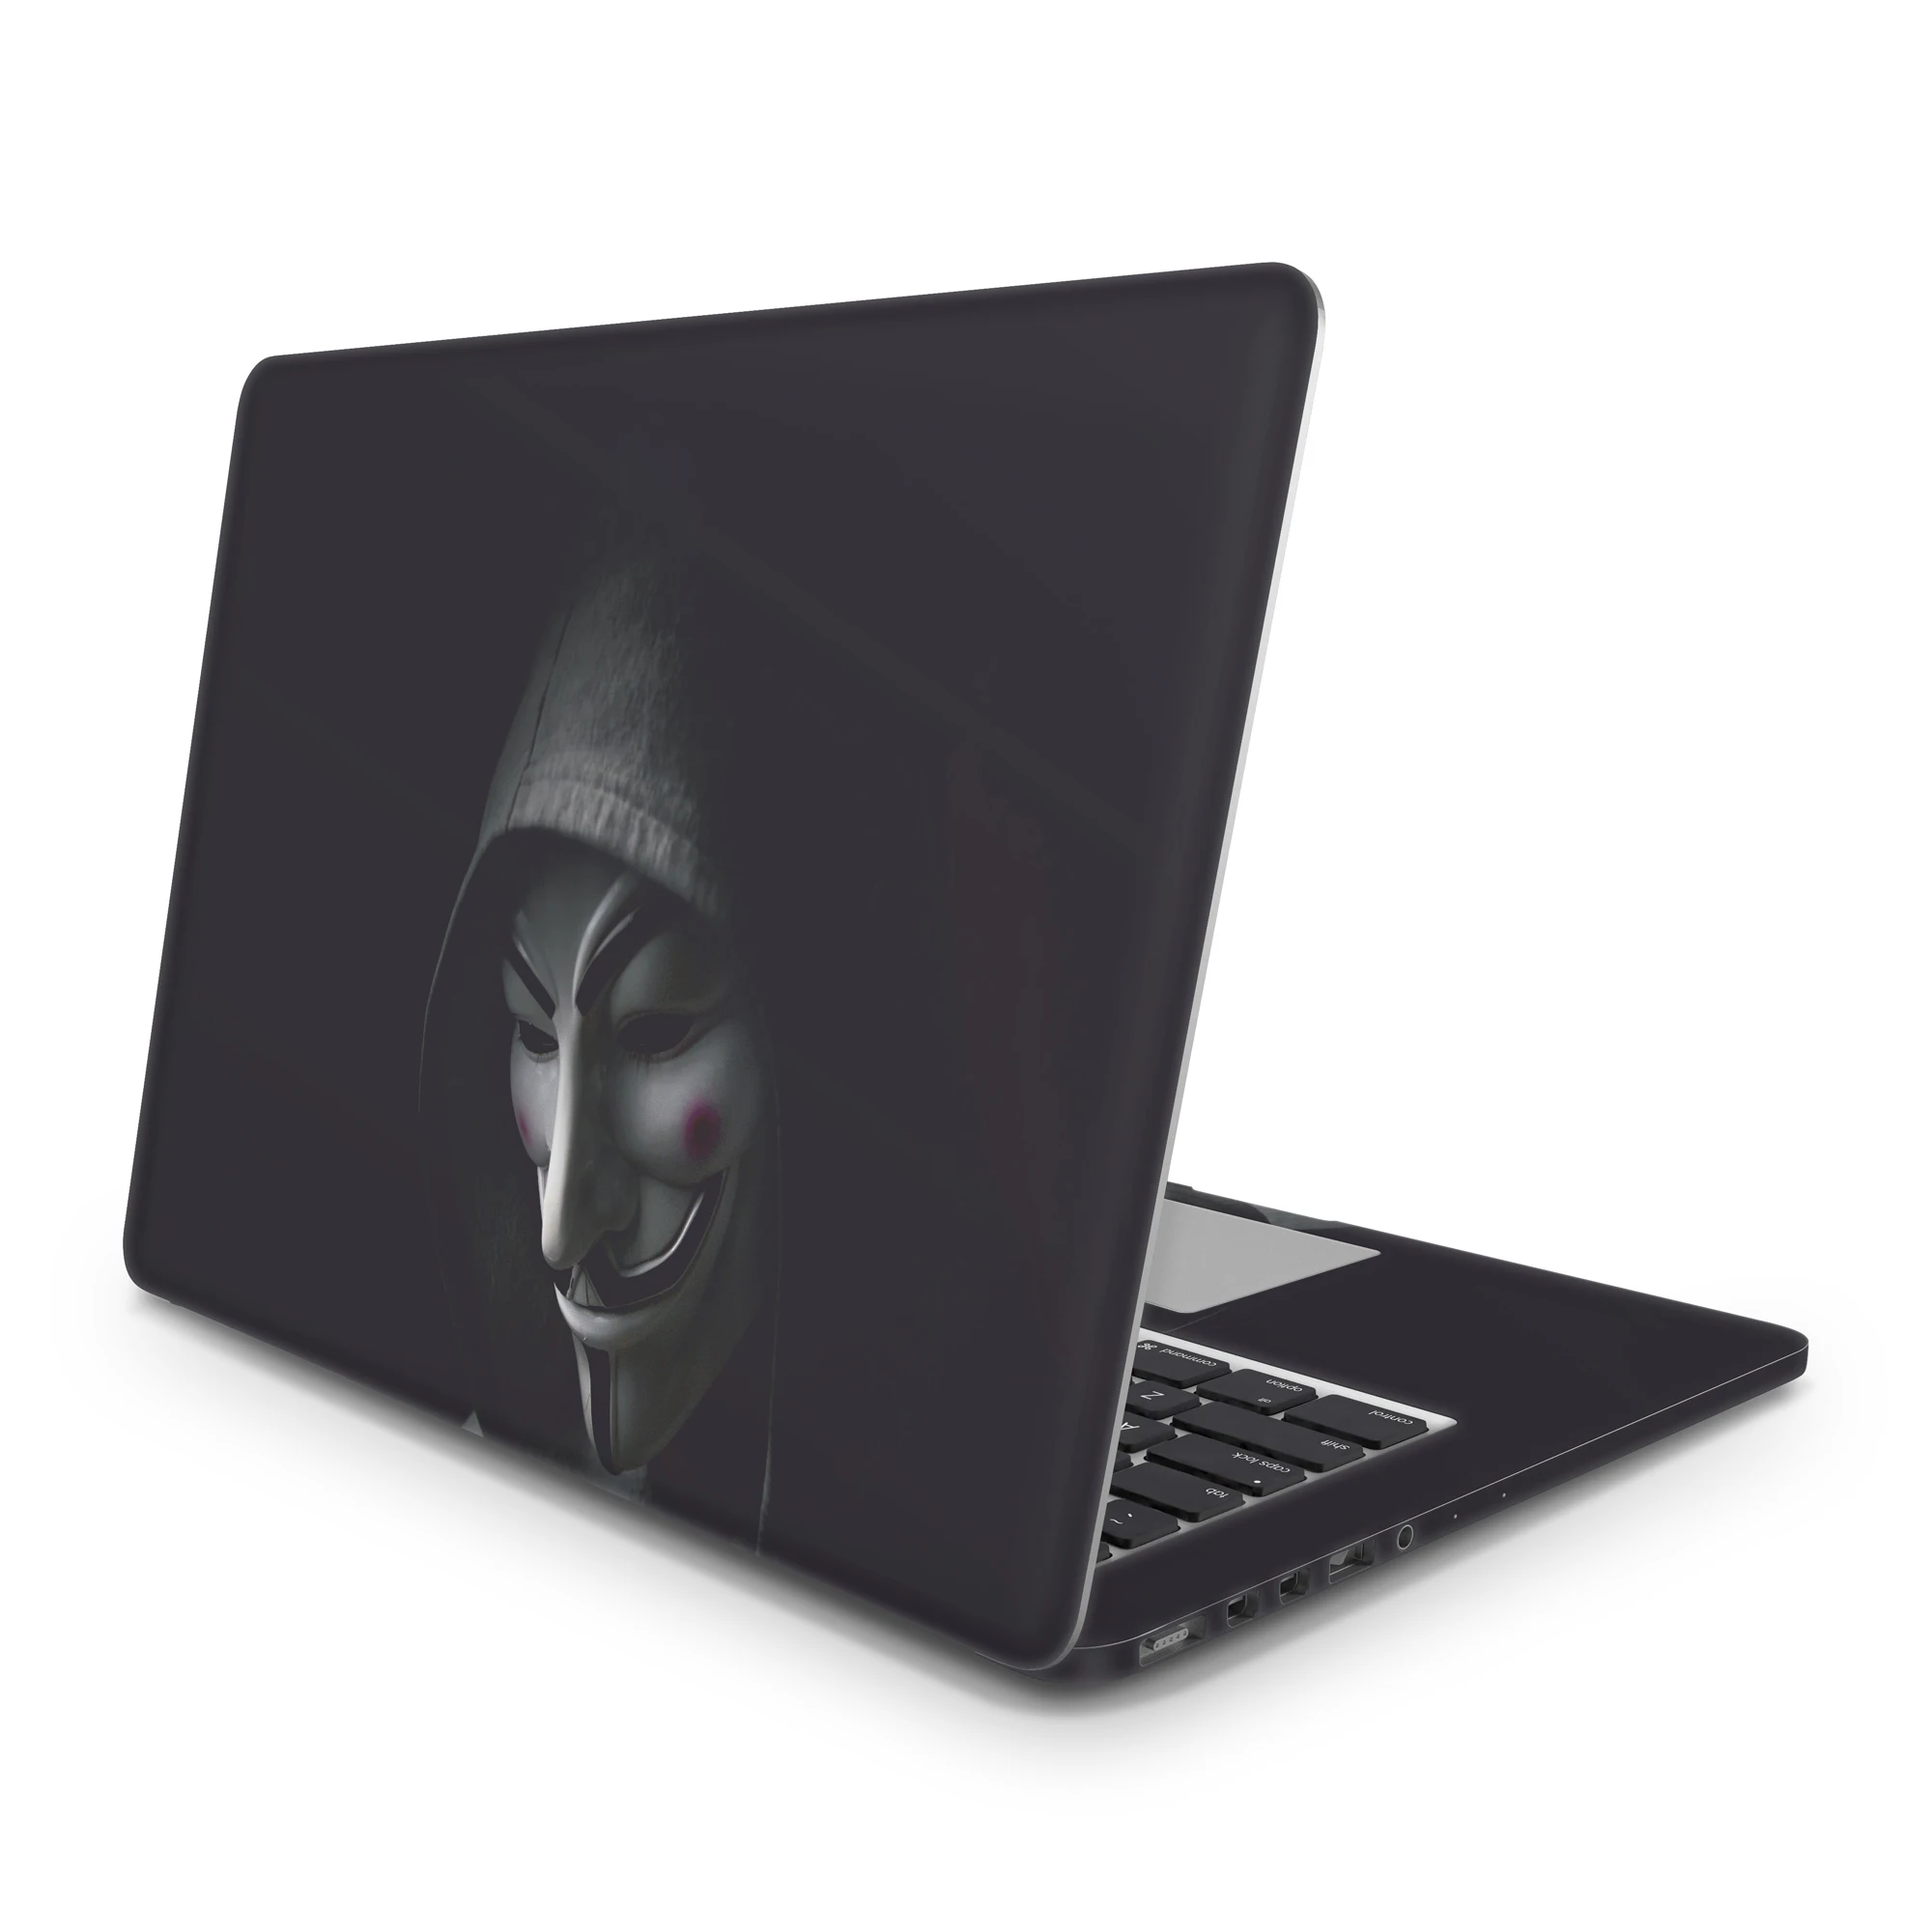 

Sticker Master Anonymous Laptop Vinyl Sticker Skin Cover For 10 12 13 14 15.4 15.6 16 17 19 " Inc Notebook Decal For Macbook,Asus,Acer,Hp,Lenovo,Huawei,Dell,Msi,Apple,Toshiba,Compaq